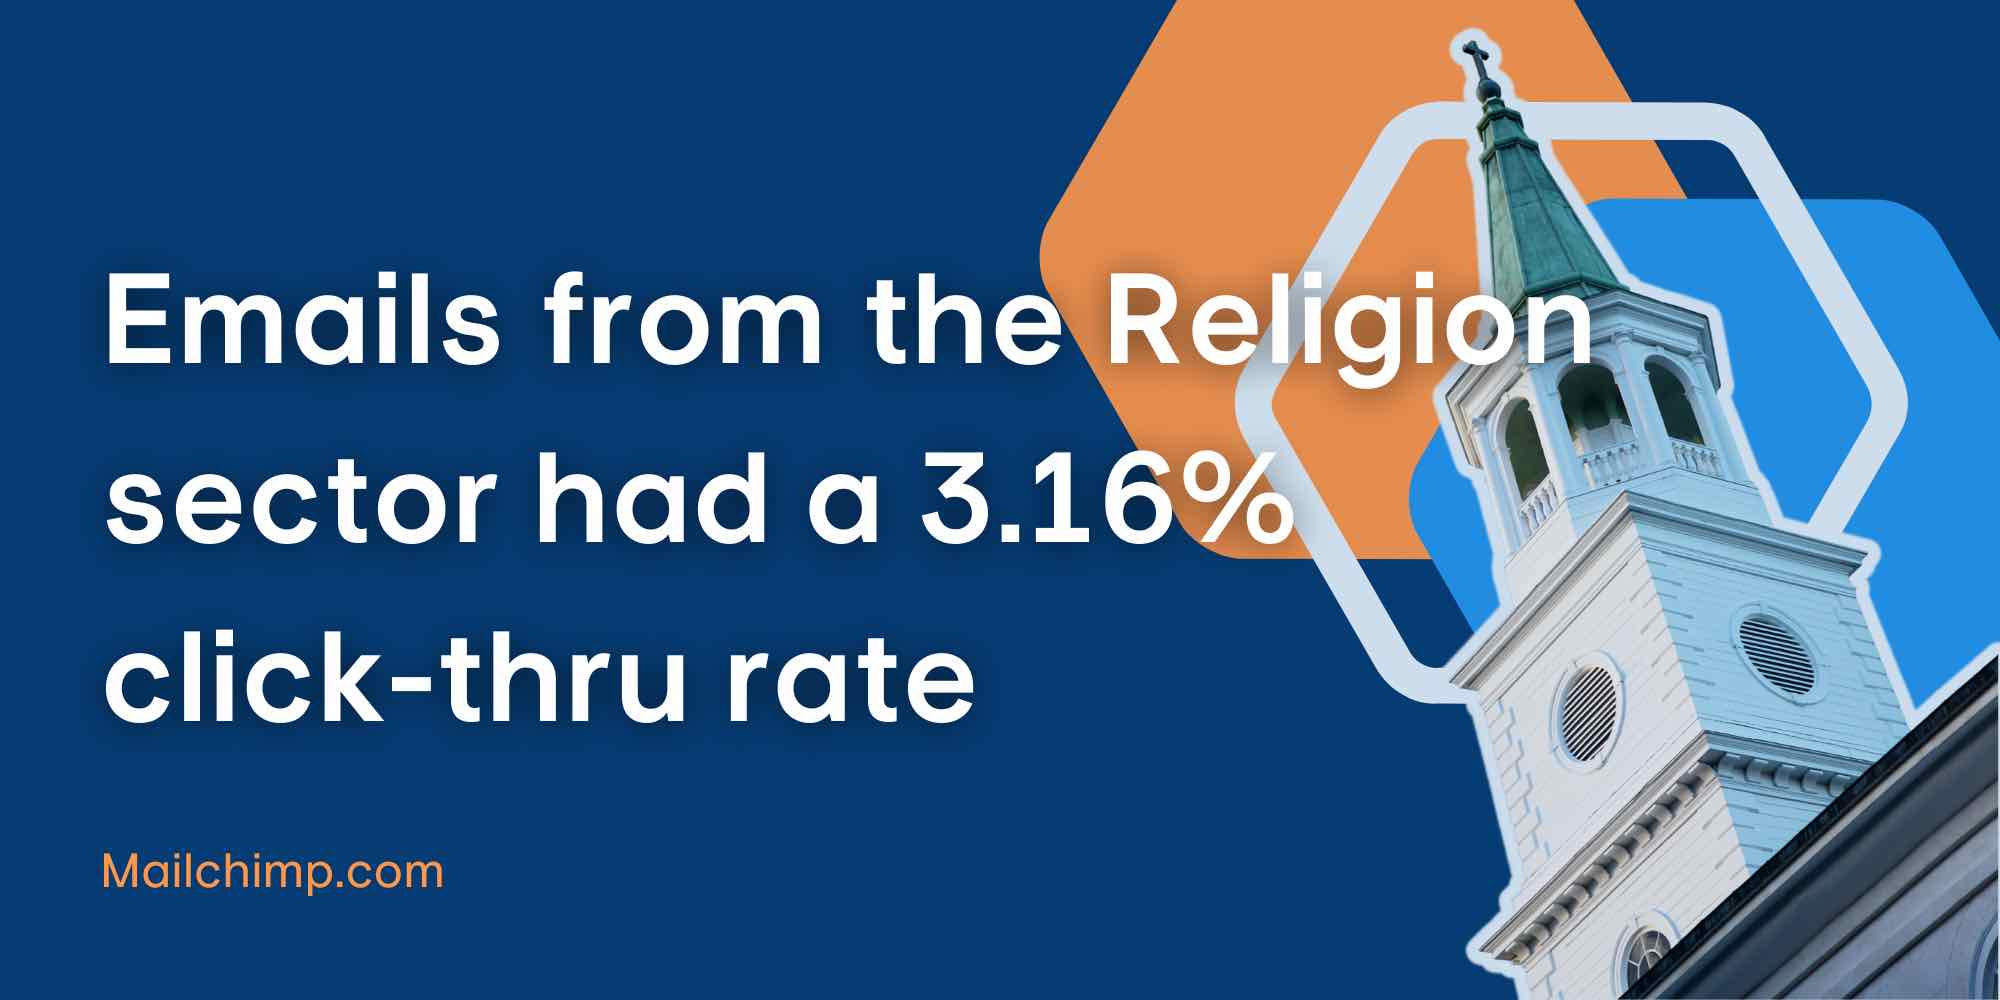 Mailchimp found that emails from the Religion sector had a higher click-thru rate than the Home and Garden sector